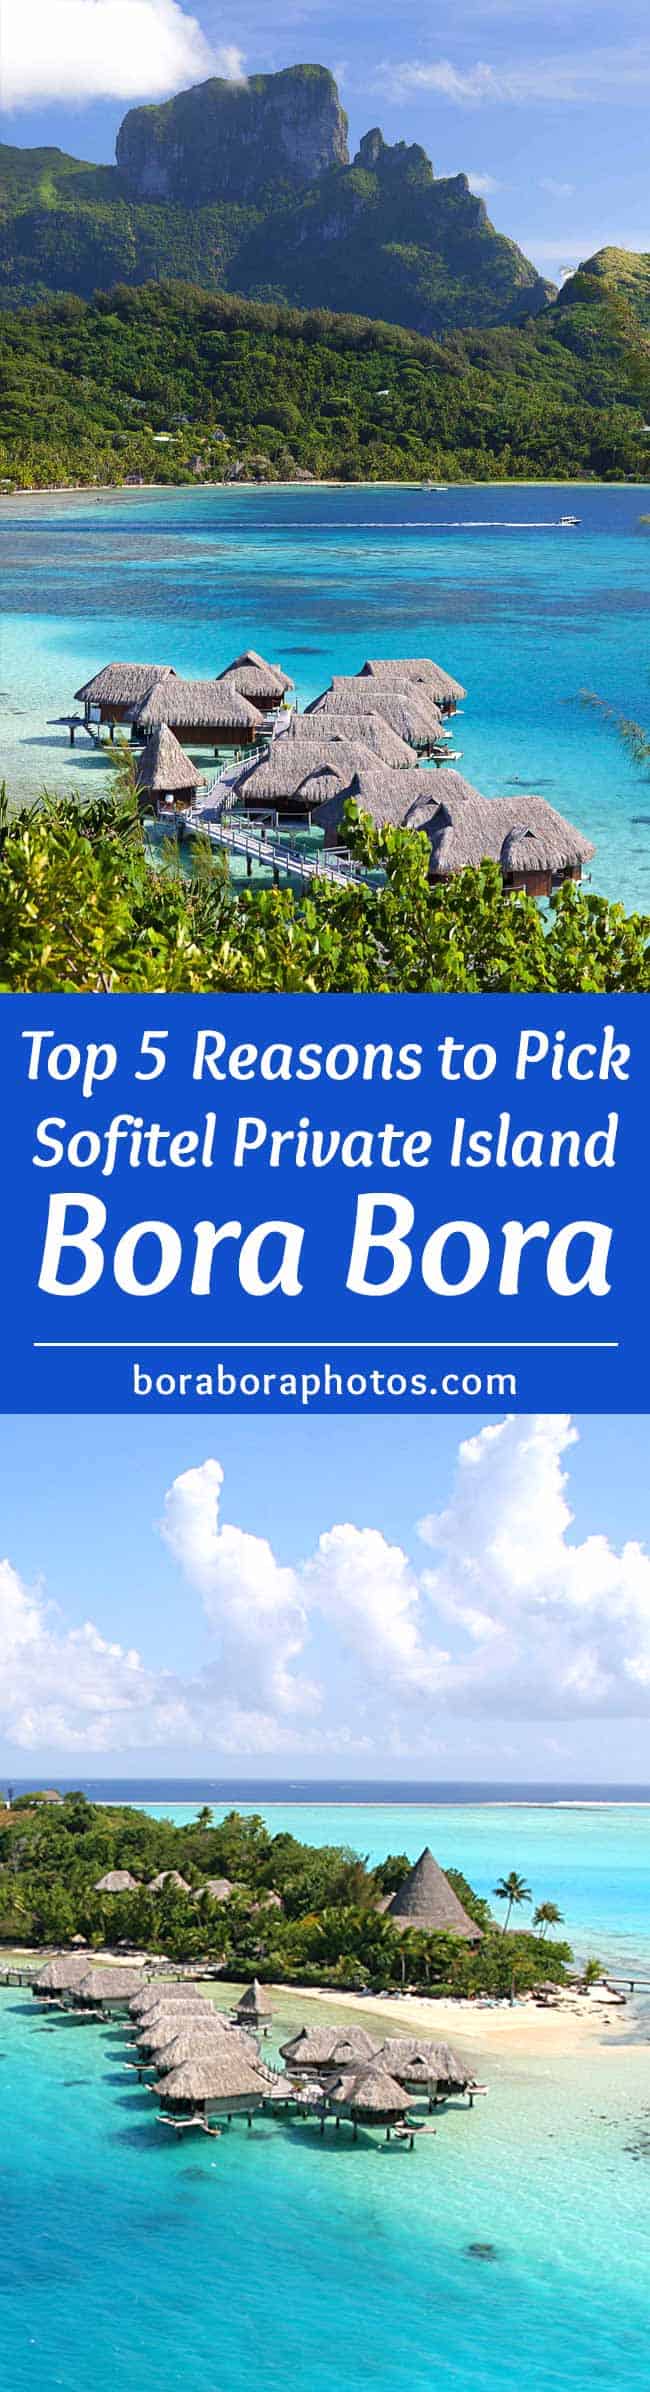 Top 5 Reasons to choose Sofitel Private Island